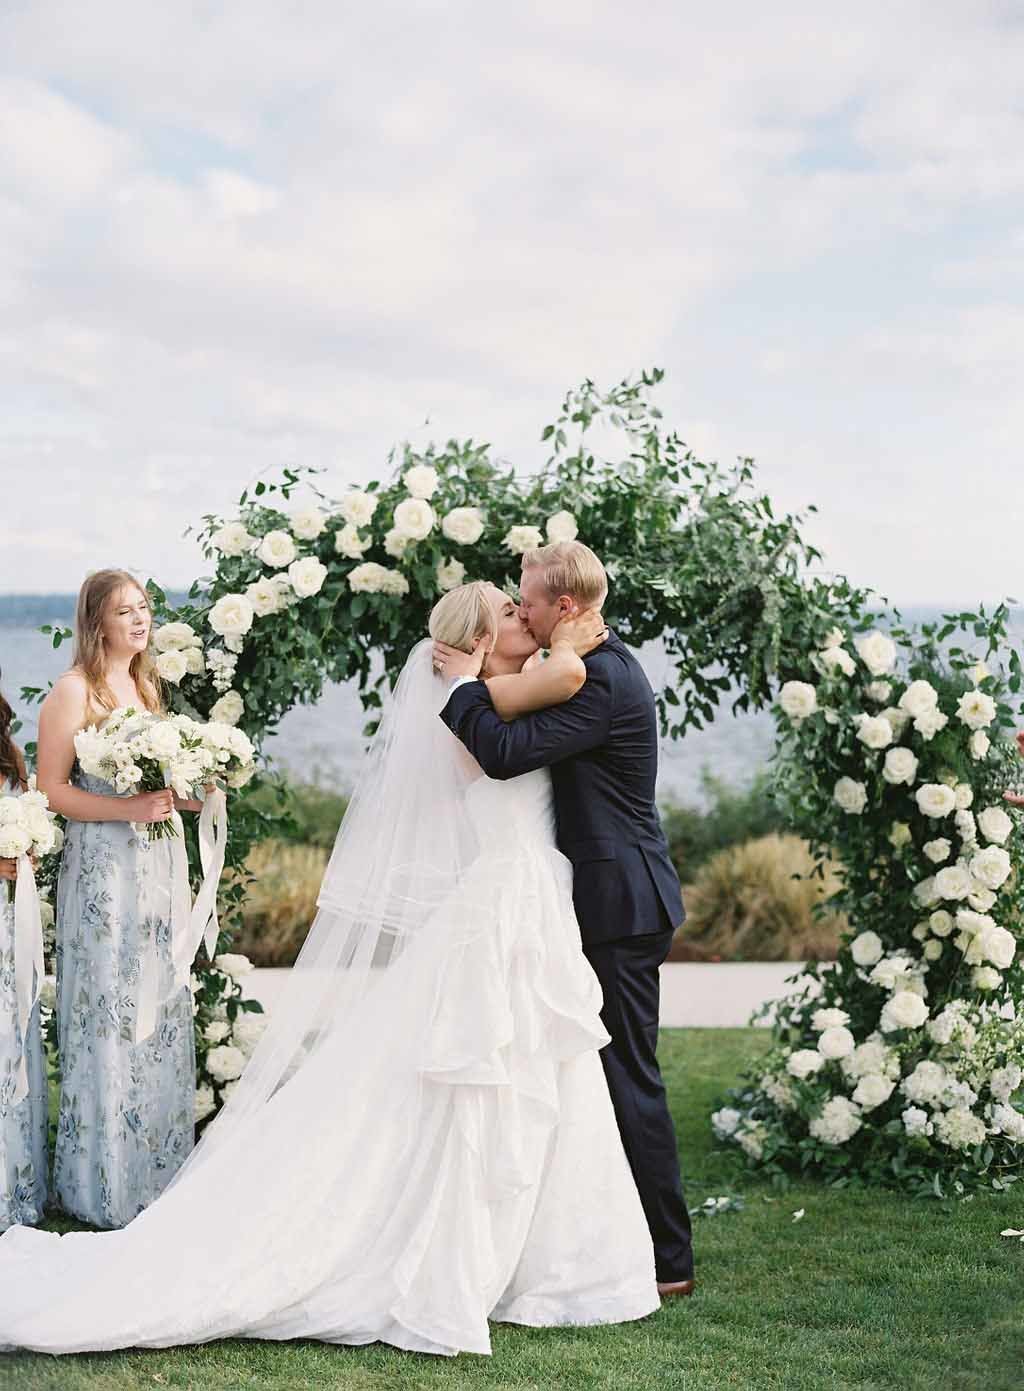 bride and groom kissing at wedding in front of greenery circle arch with white flowers